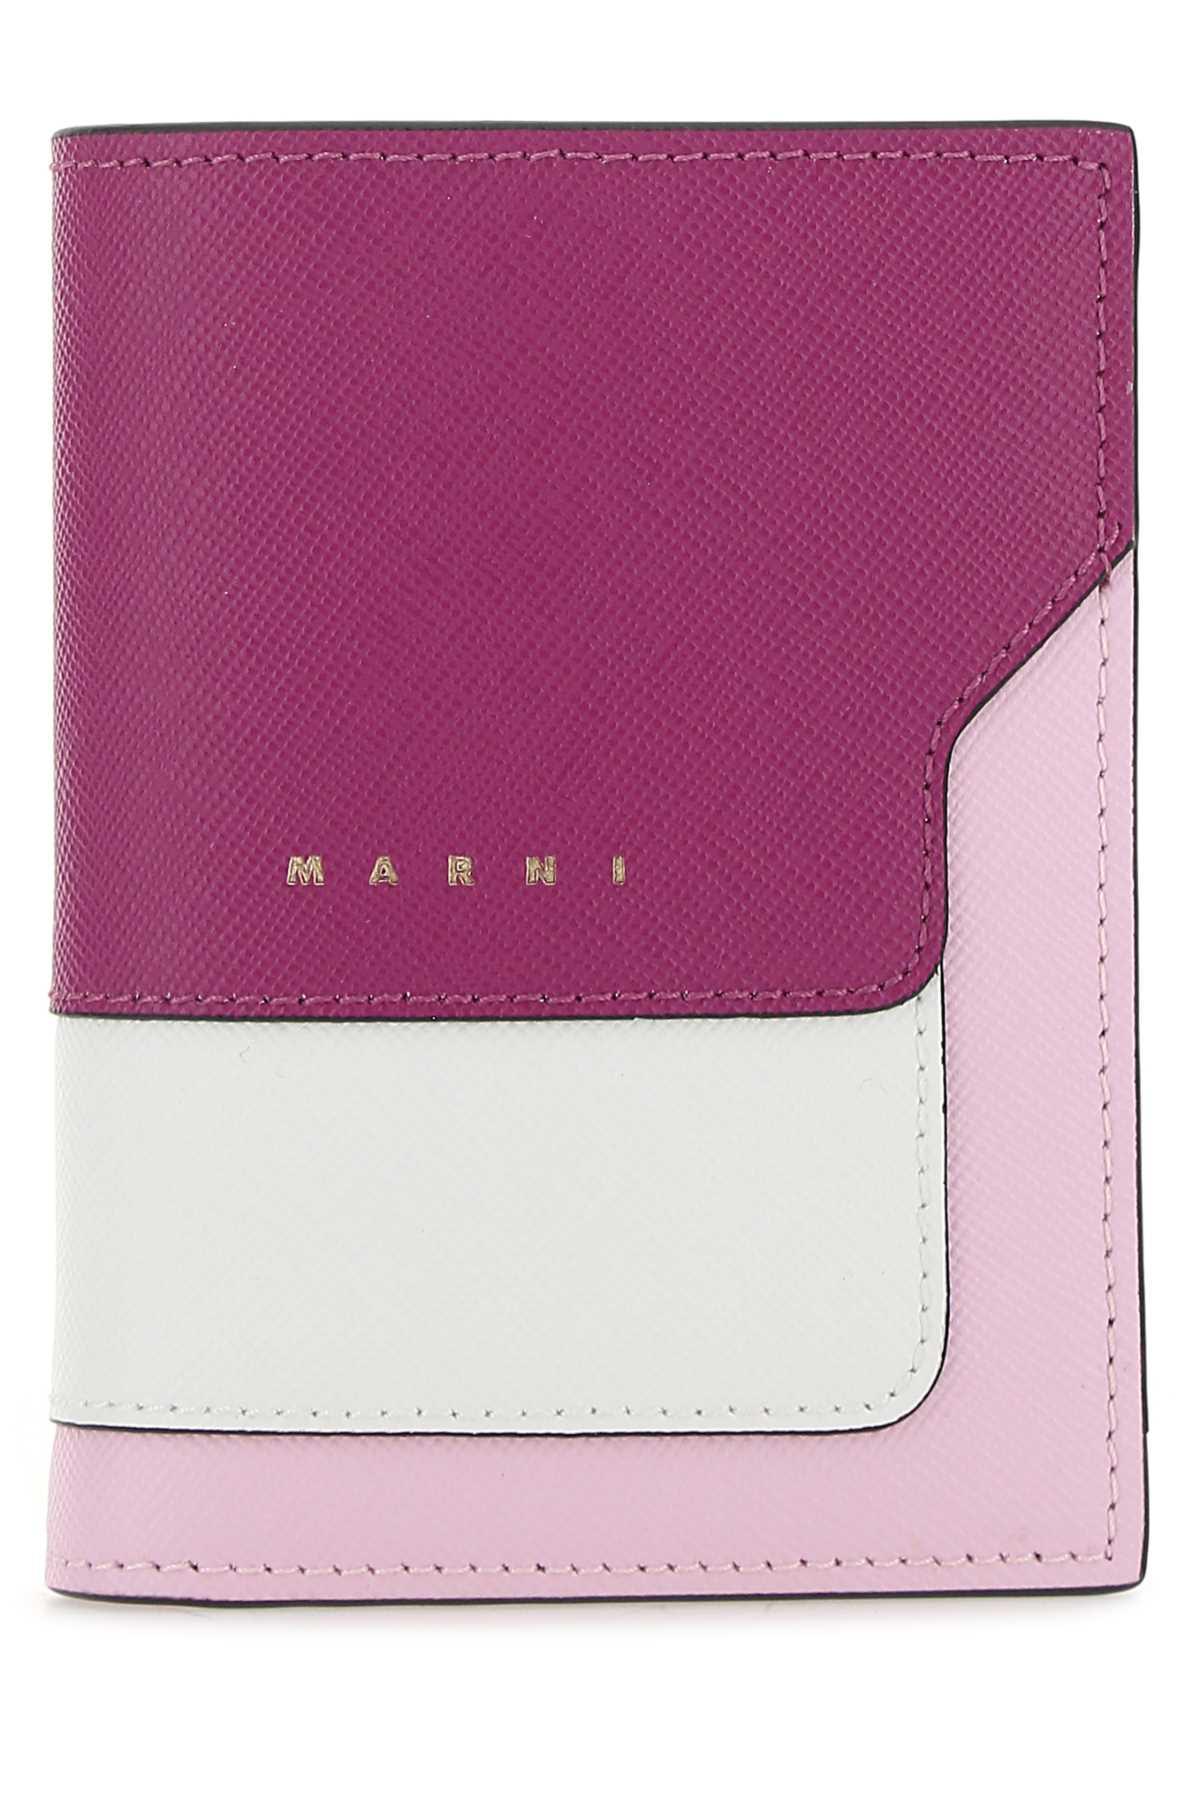 Marni Multicolor Leather Wallet in Green Womens Wallets and cardholders Marni Wallets and cardholders Save 7% 